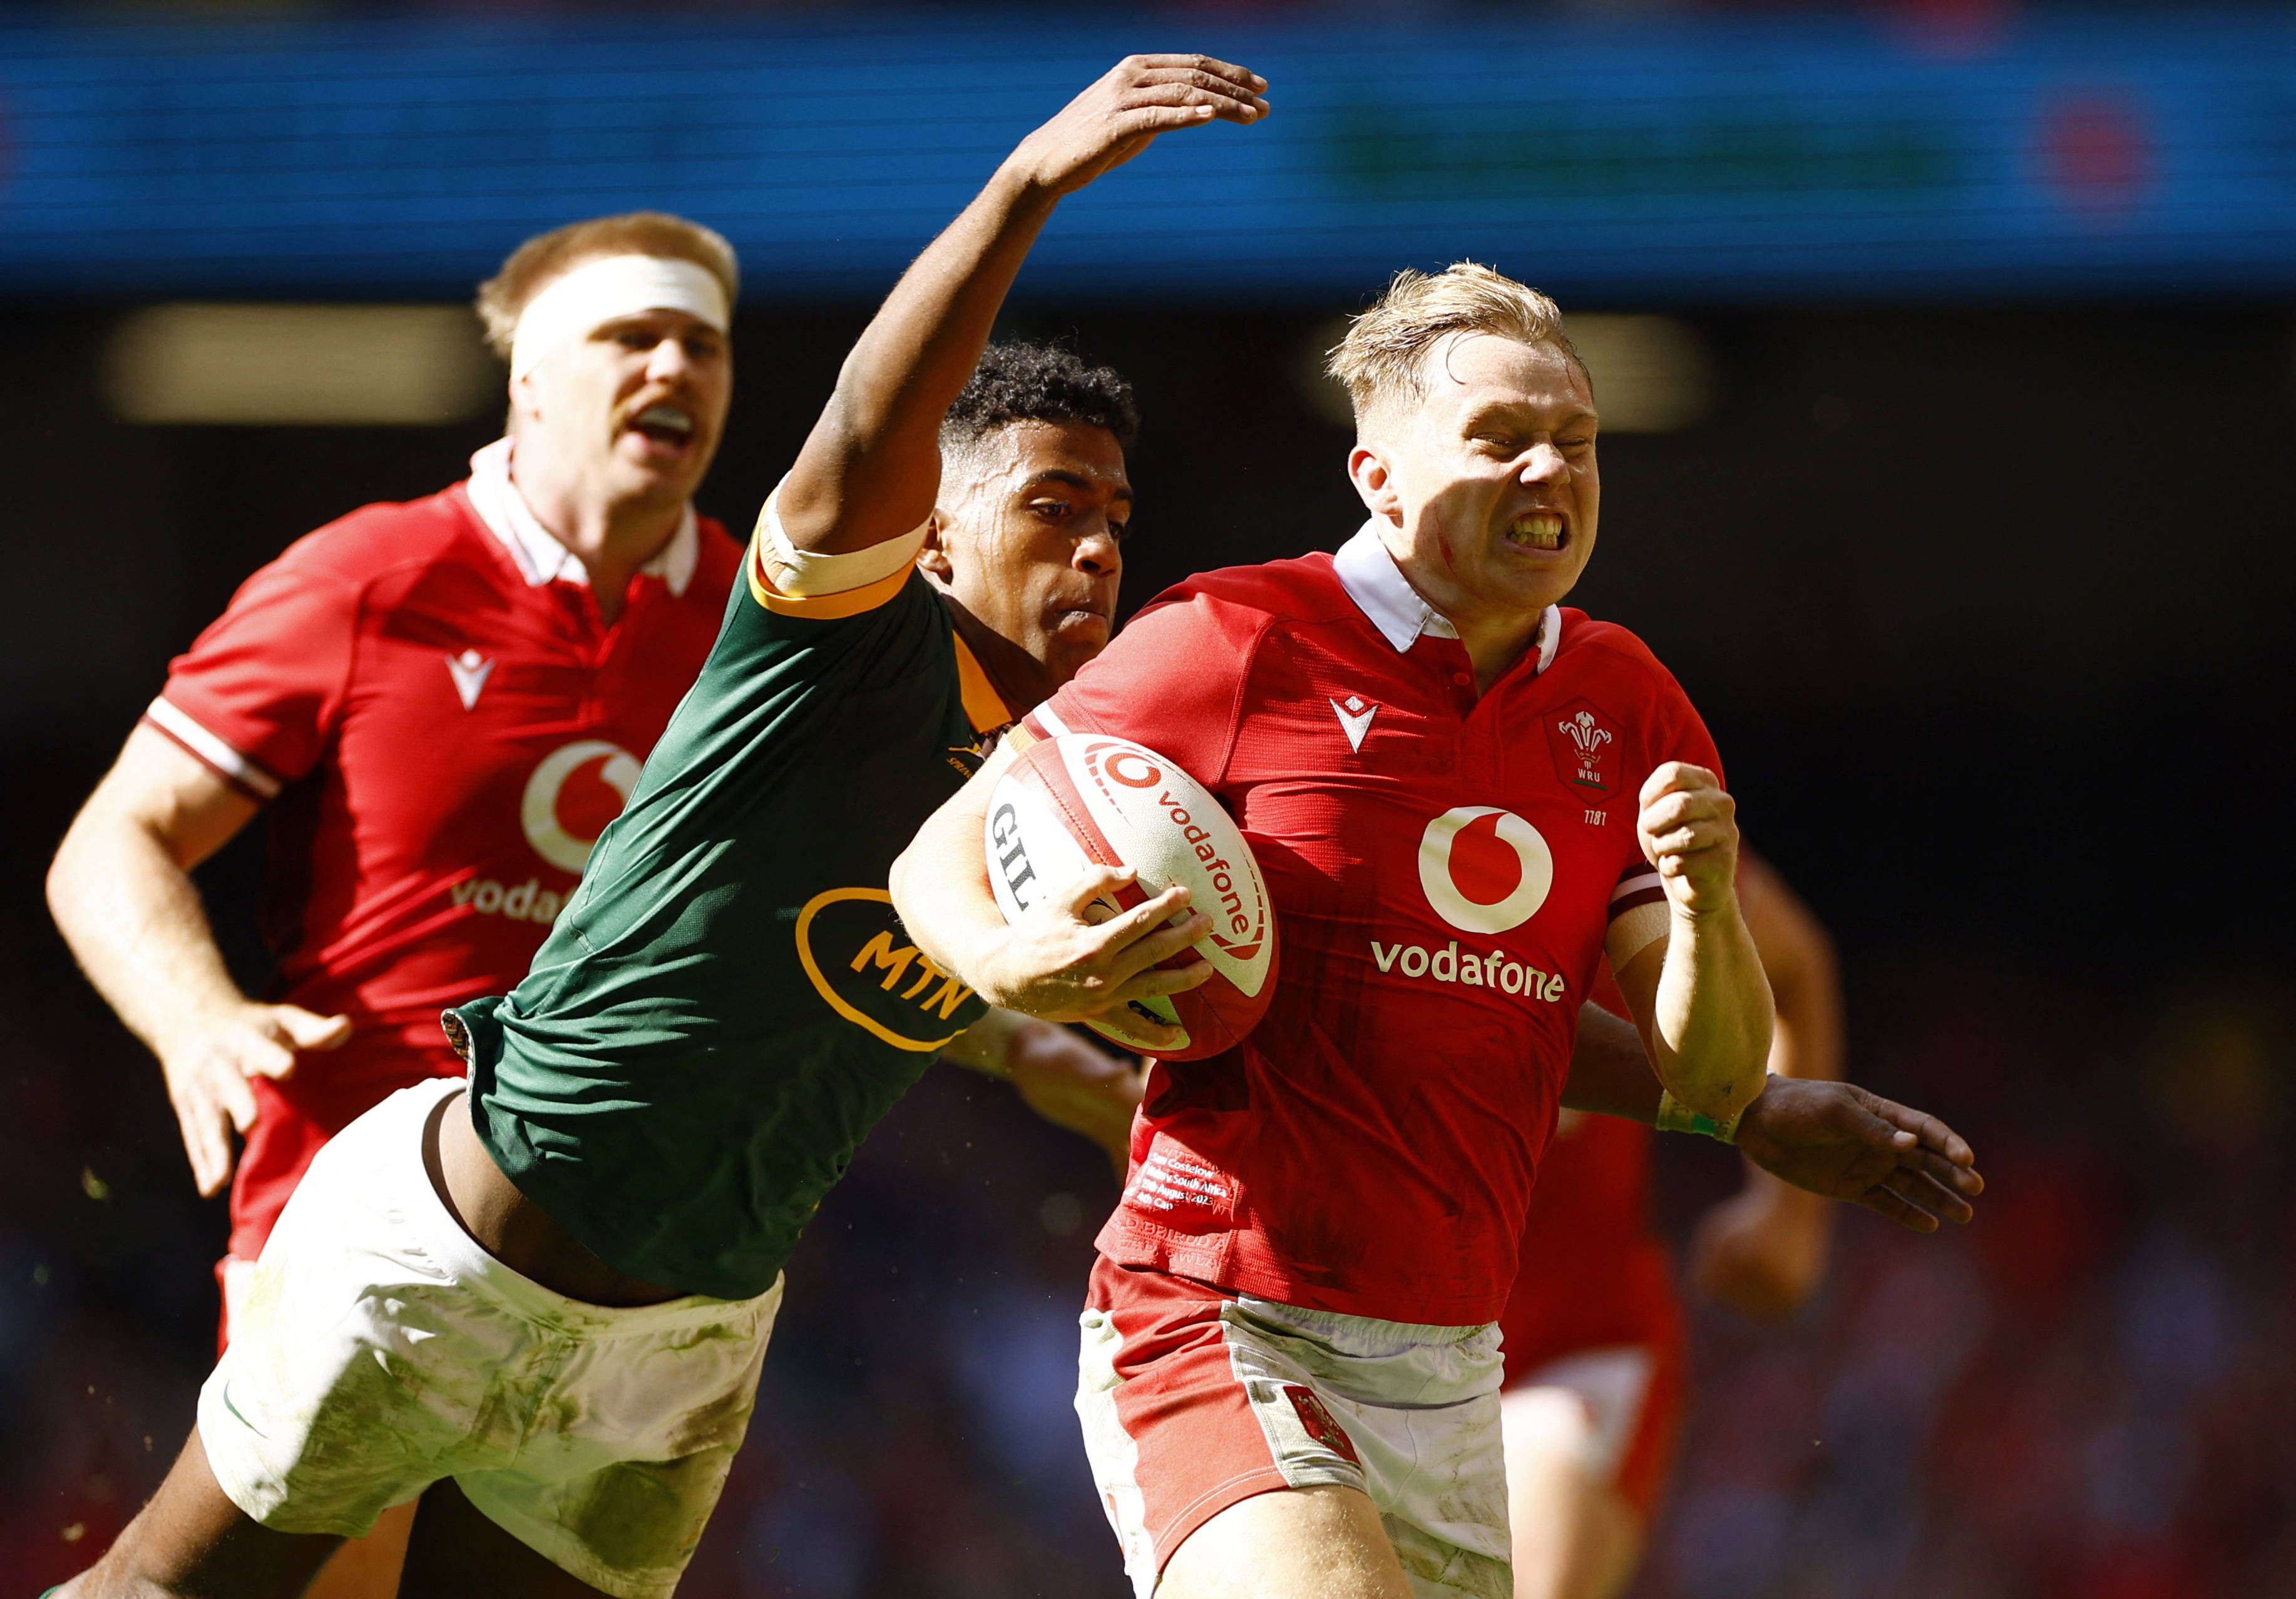 Superb South Africa put Wales to the sword with 52-16 win Reuters